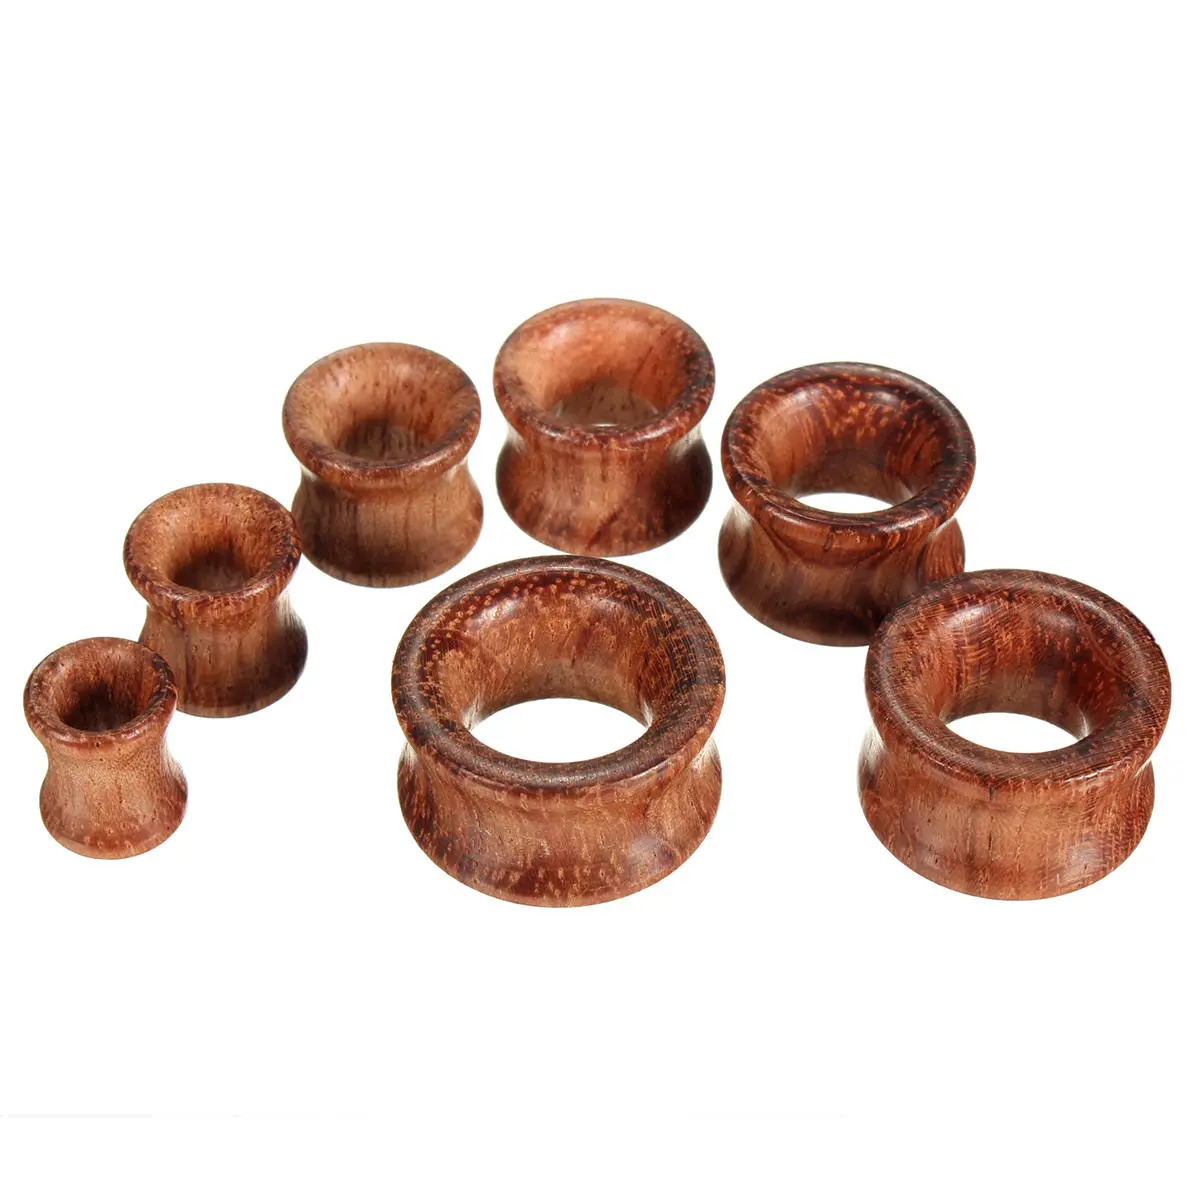 8mm-20mm 1pc wooden tunnels ear gauges plugs hollow expander